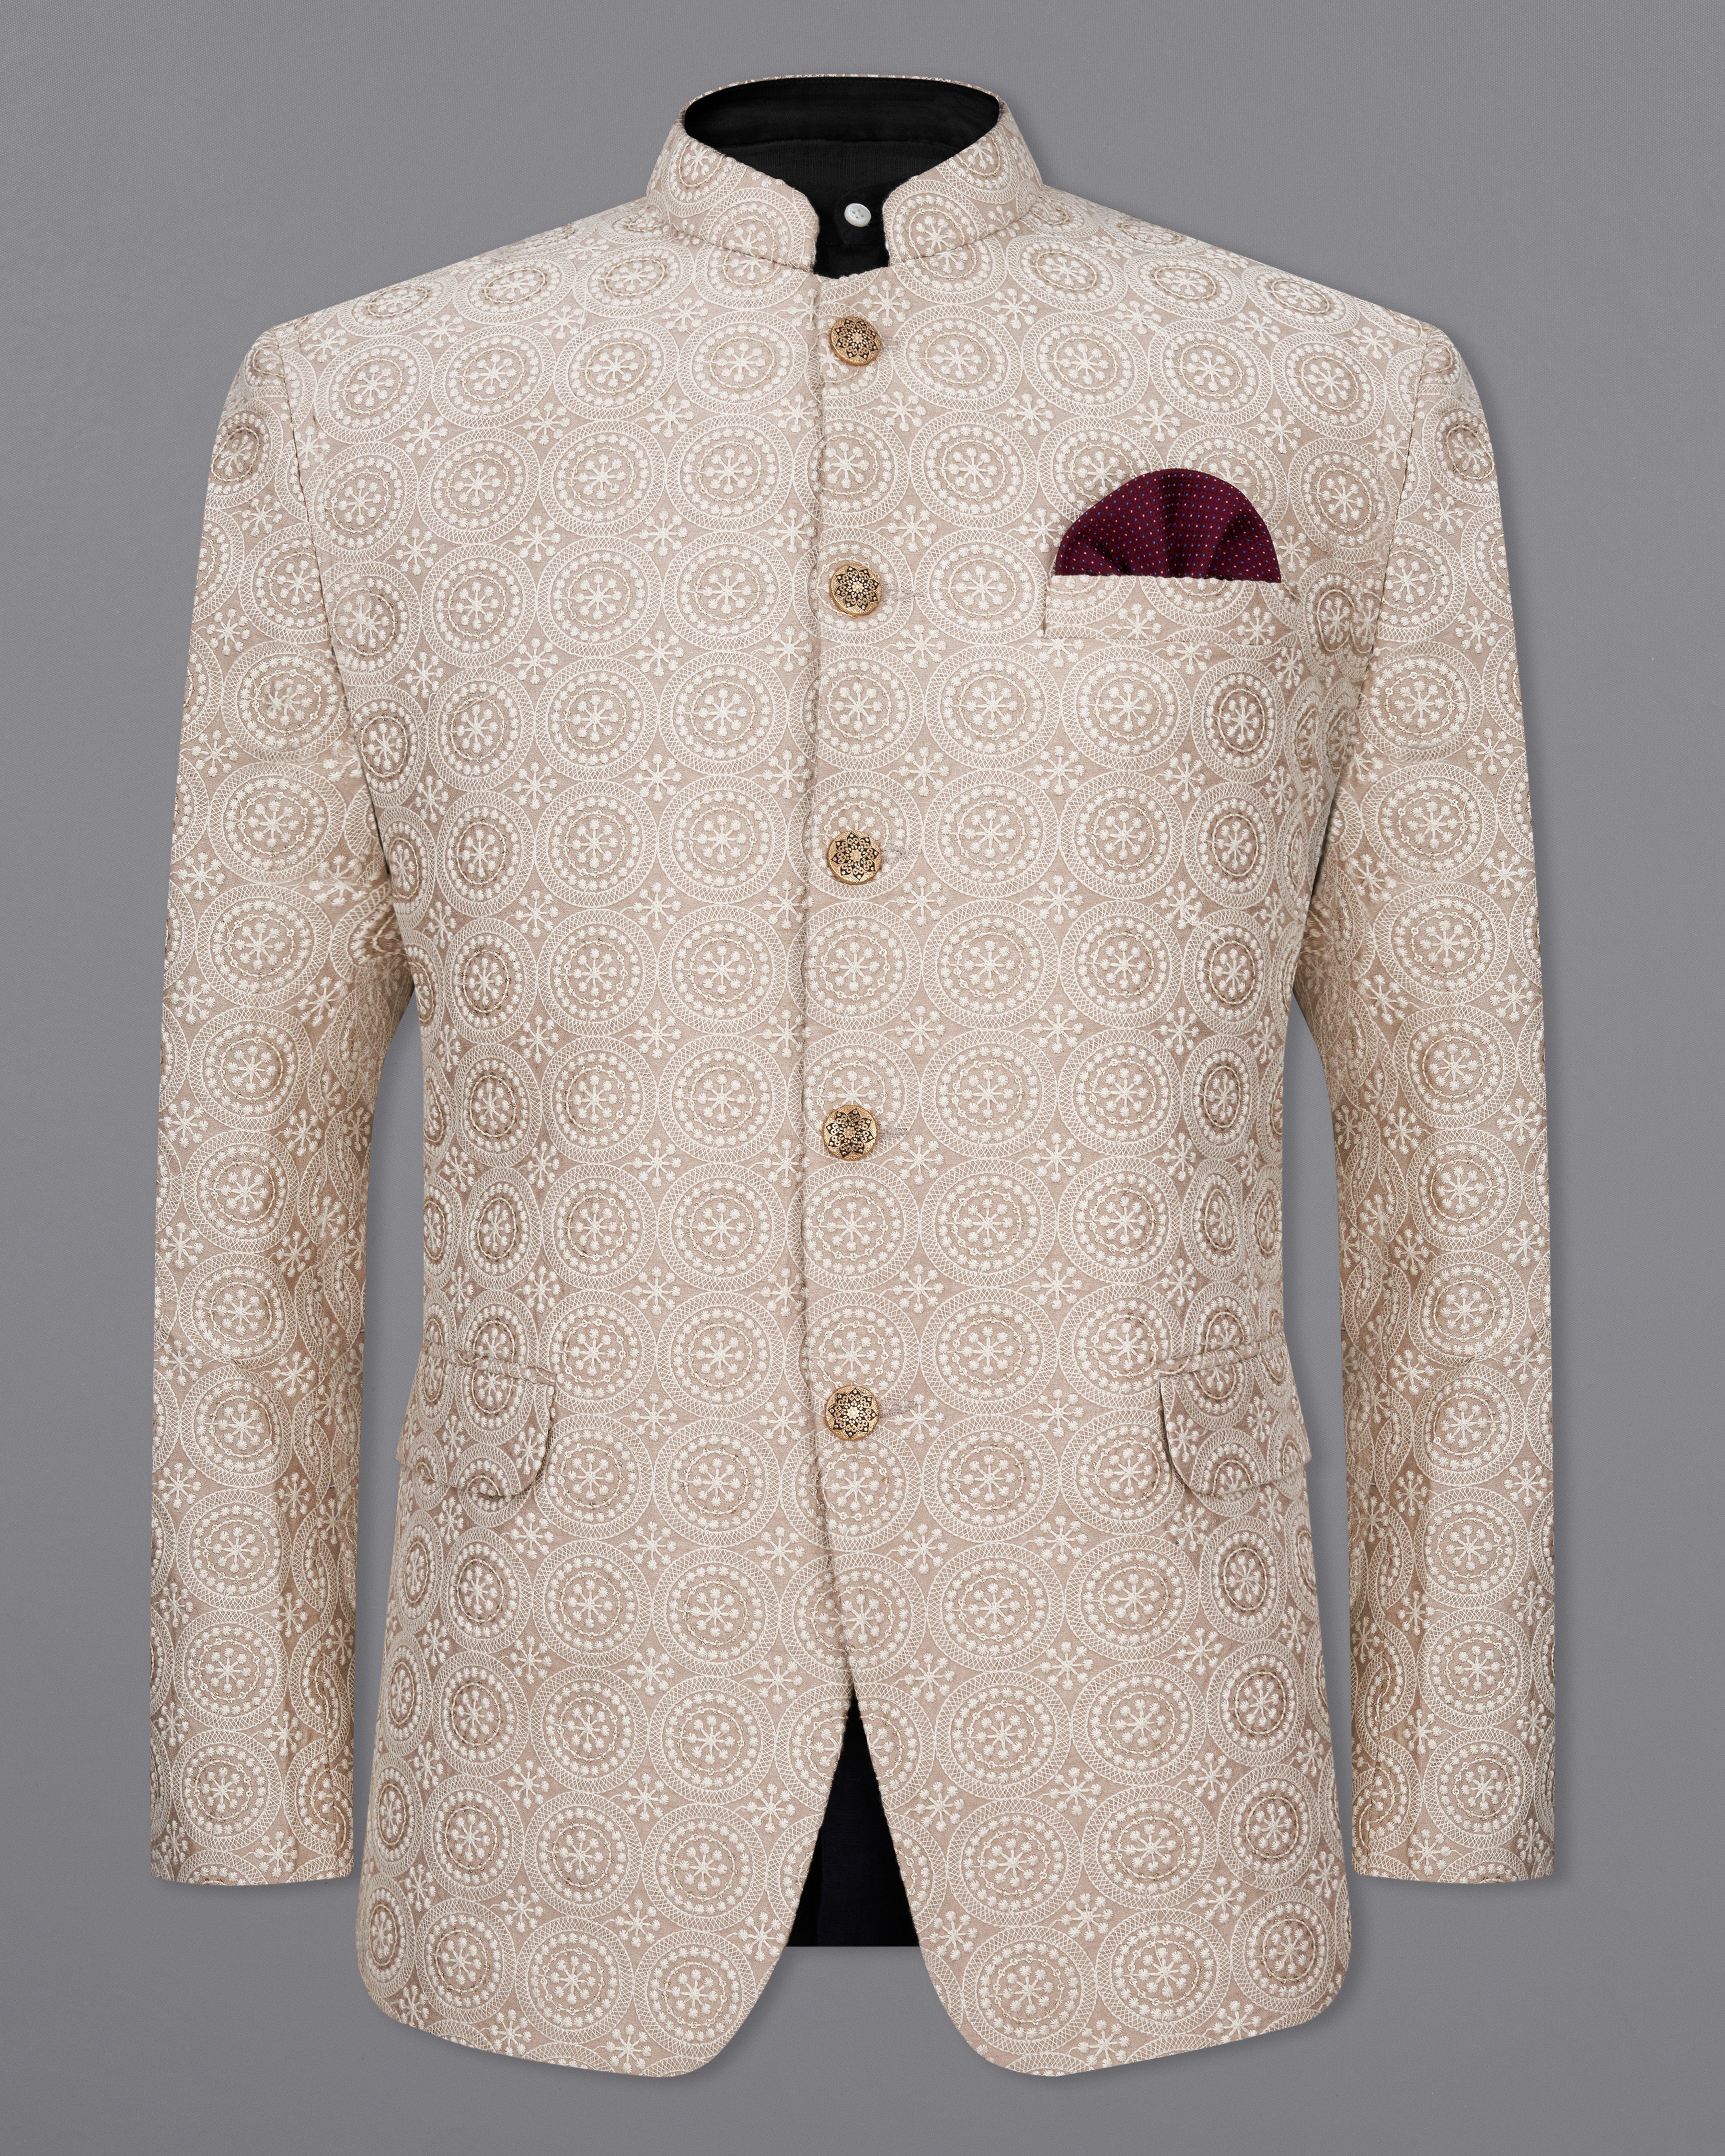 Sisal Brown Cotton Thread Embroidered Bandhgala Blazer BL2419-BG-36,BL2419-BG-38,BL2419-BG-40,BL2419-BG-42,BL2419-BG-44,BL2419-BG-46,BL2419-BG-48,BL2419-BG-50,BL2419-BG-52,BL2419-BG-54,BL2419-BG-56,BL2419-BG-58,BL2419-BG-60